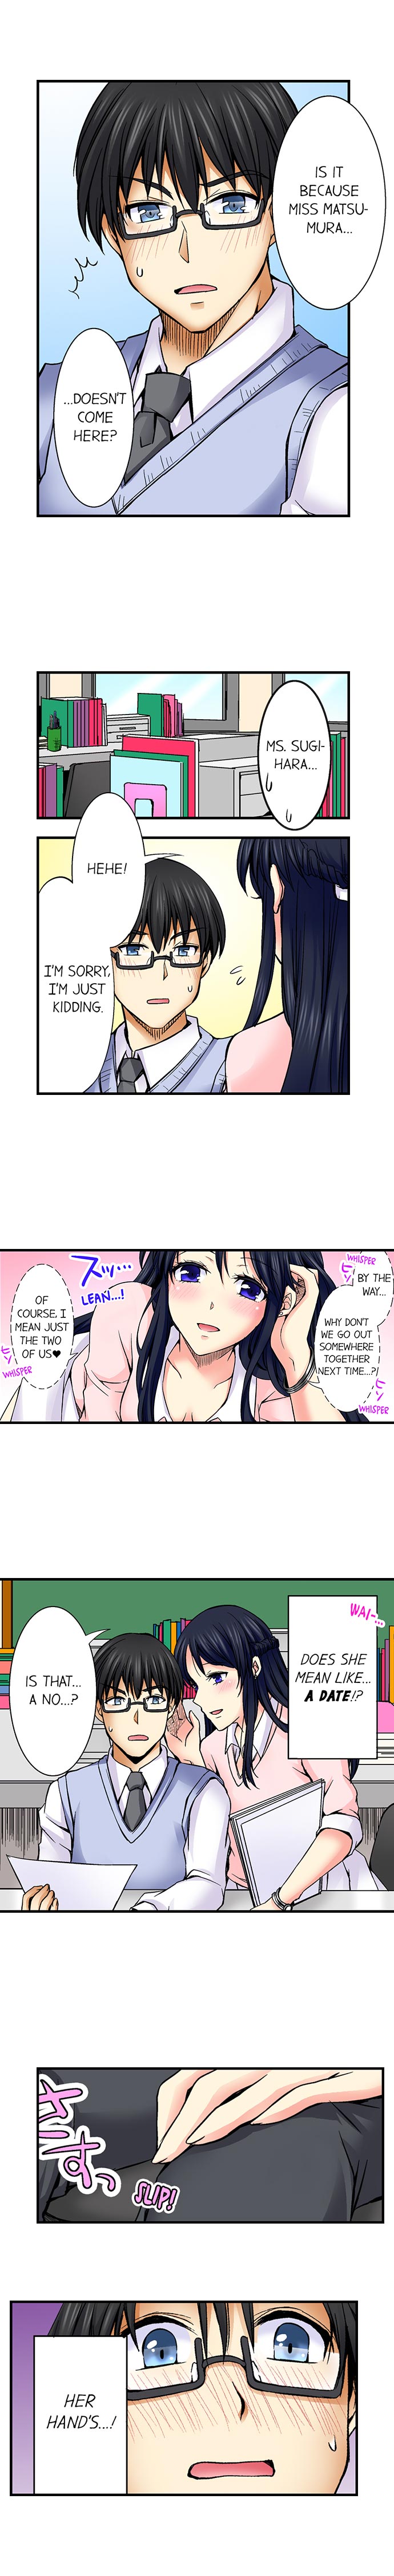 Why Can't i Have Sex With My Teacher? - Chapter 16 Page 3